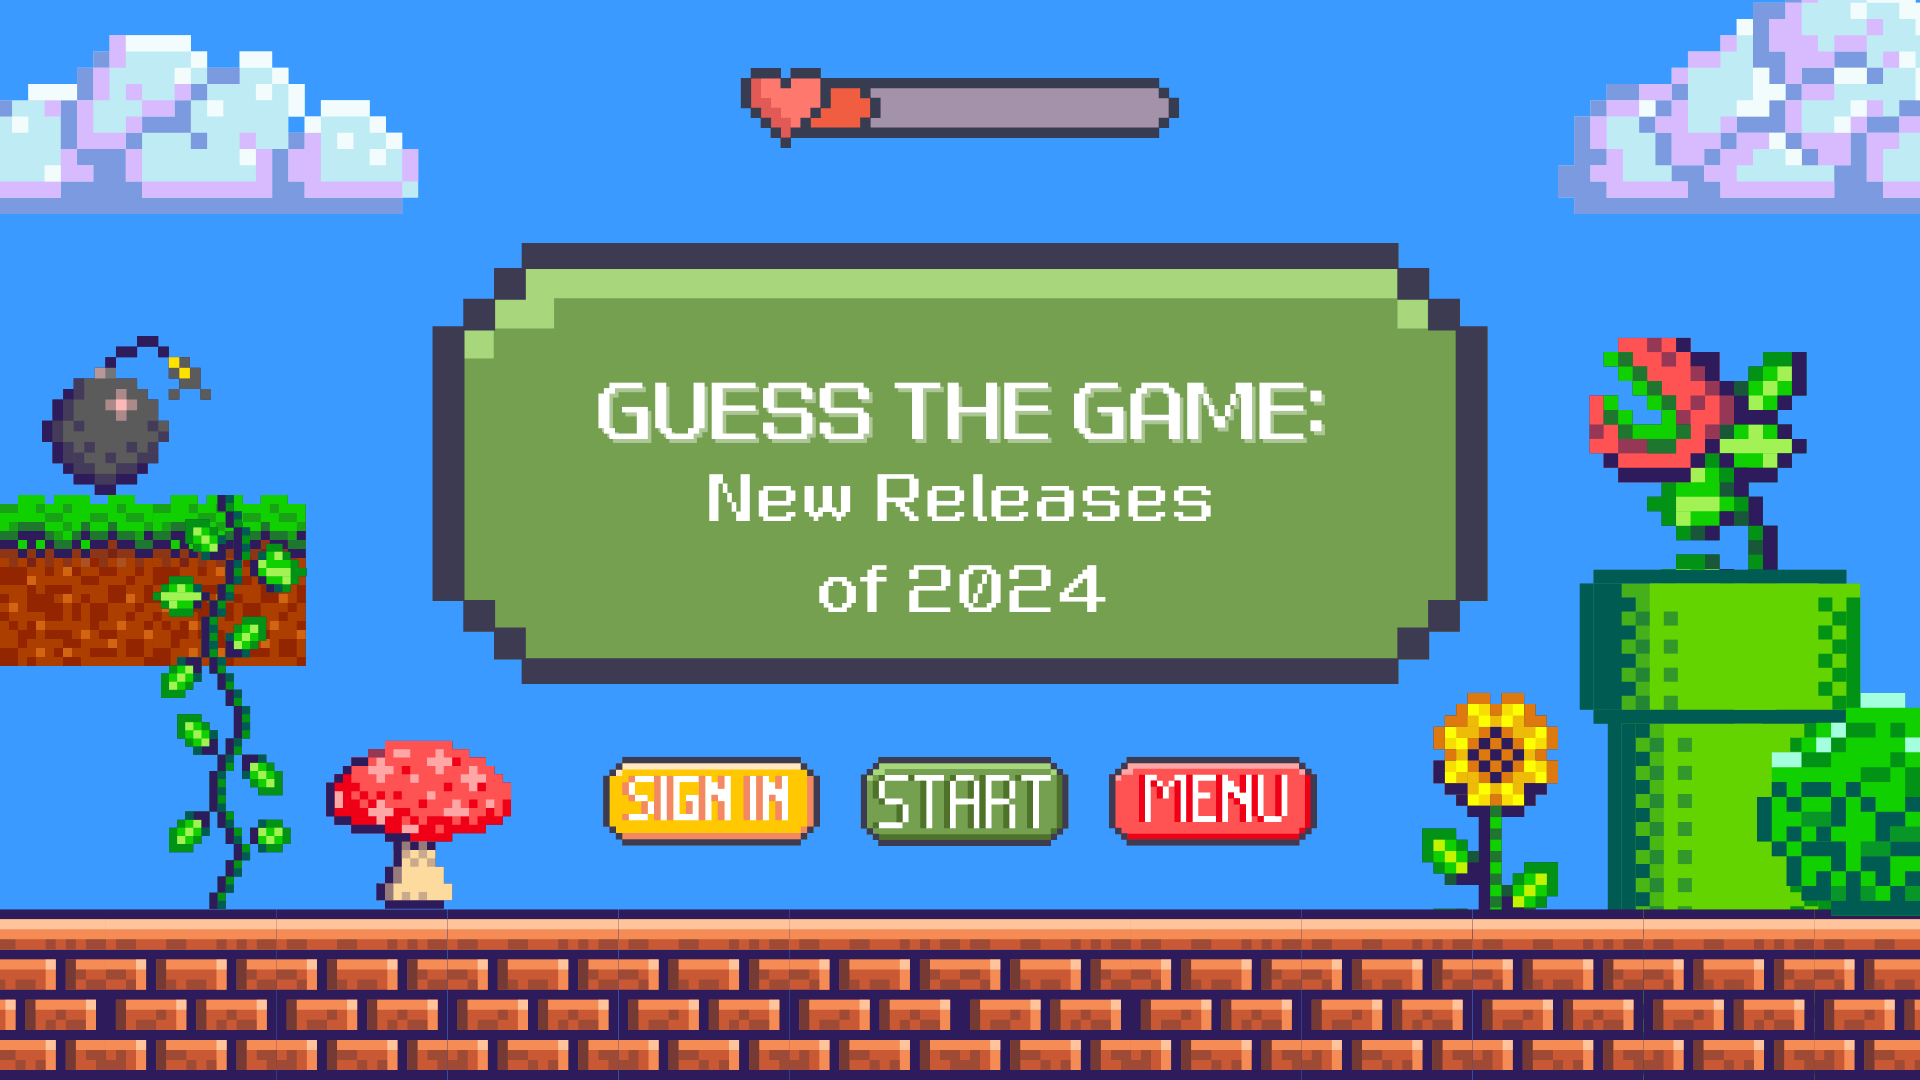 Guess the Game: New Releases of 2024